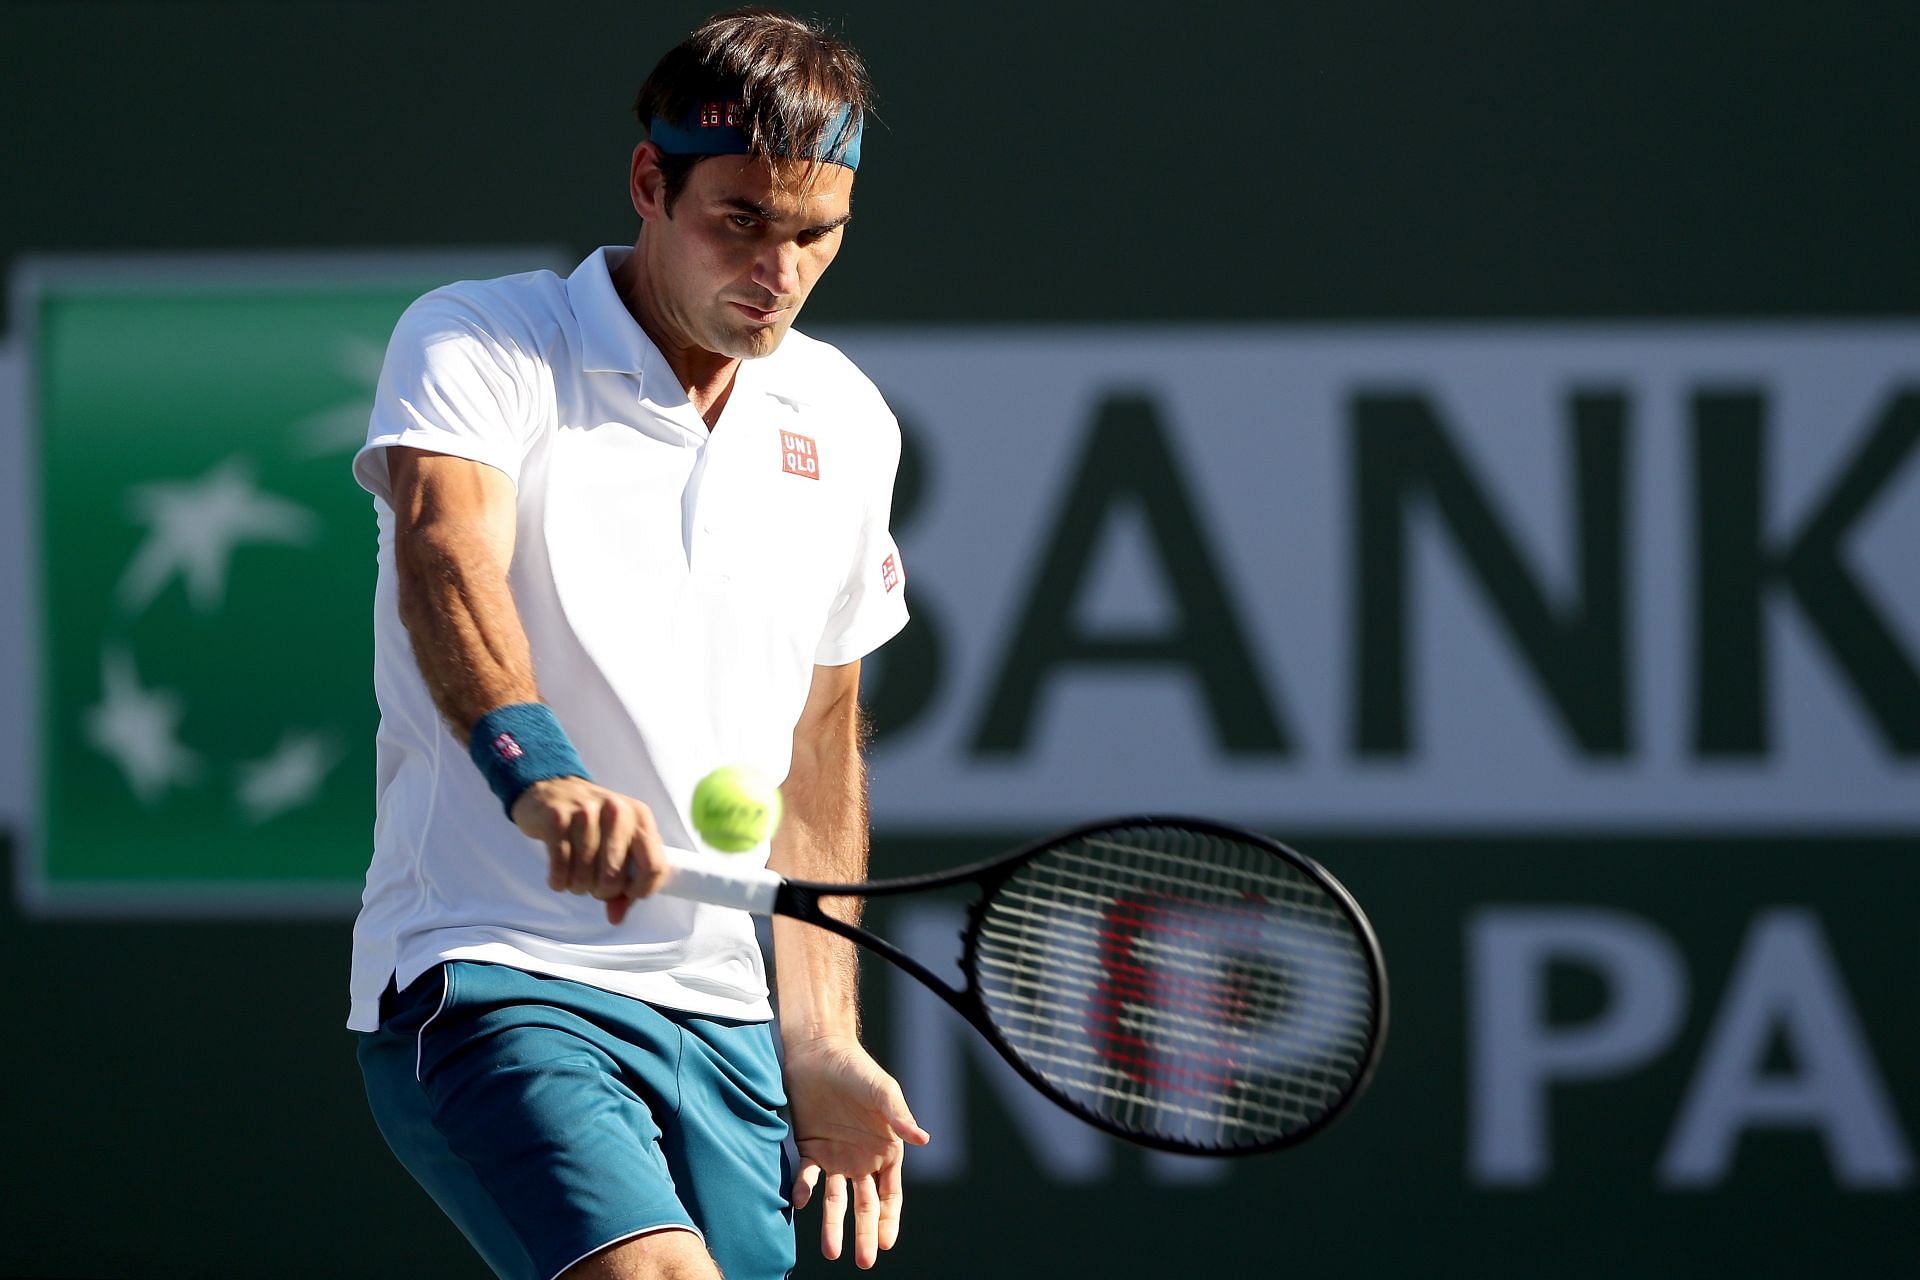 Roger Federer had a walkover against Nadal in the 2019 Indian Wells semis.